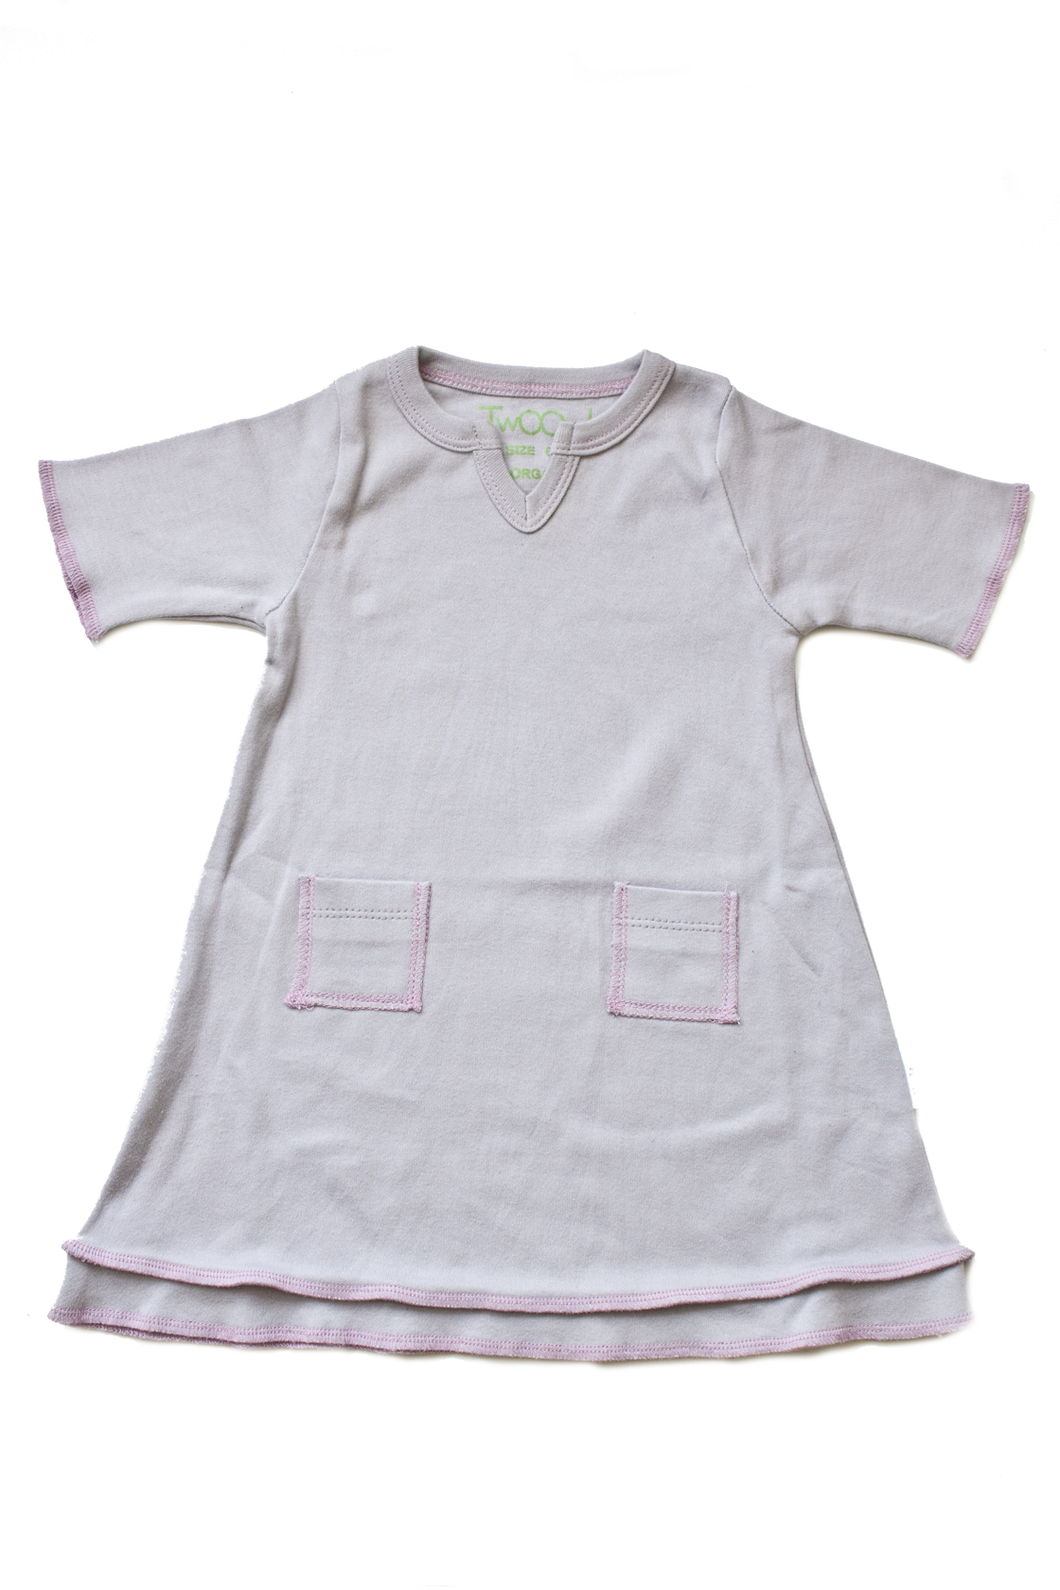 TwOOwls Lavender/Pink Baby Tunic Dress -100% organic cotton